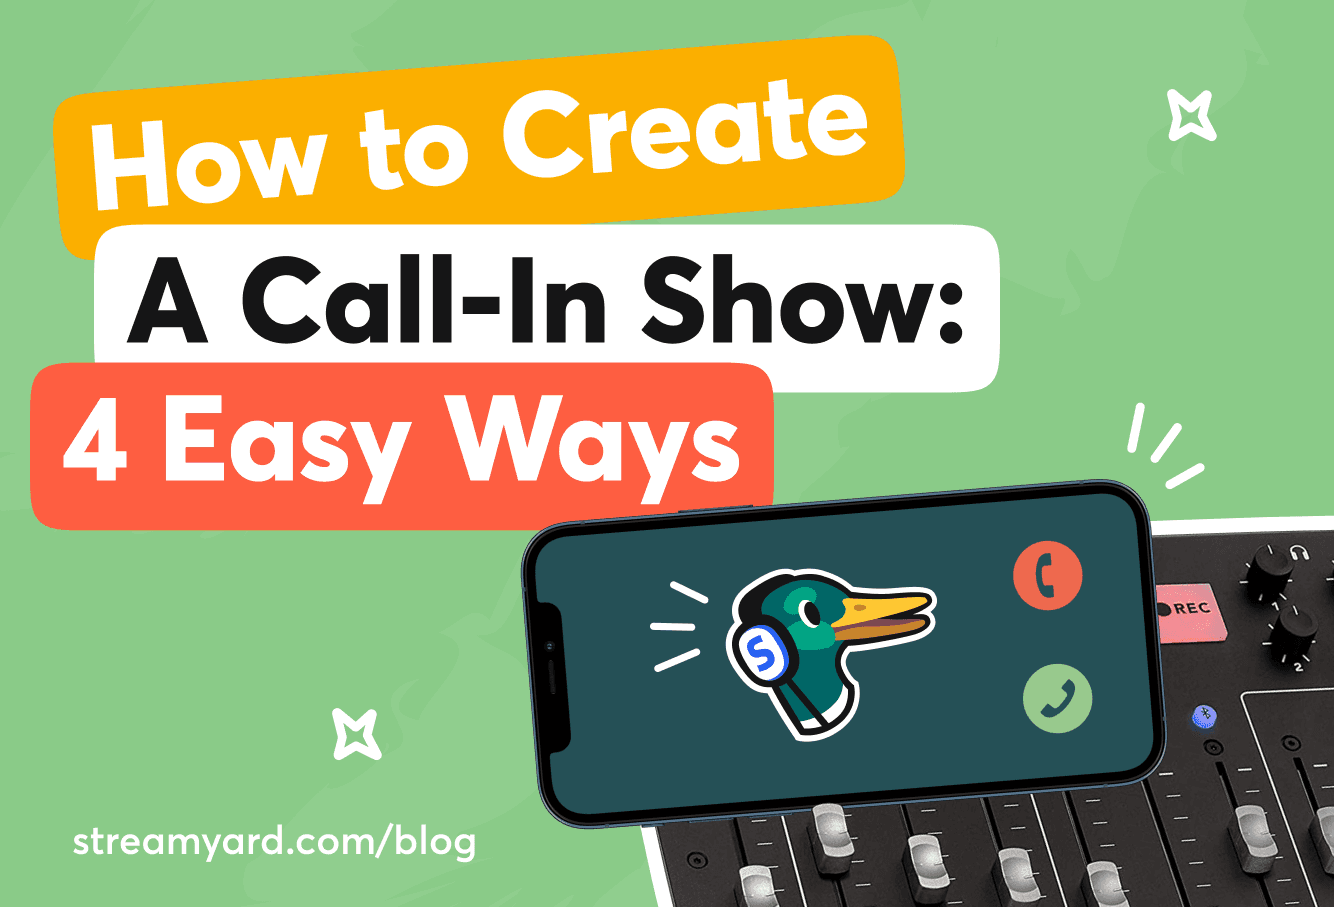 How to Create a Call-in Show: 4 Easy Ways